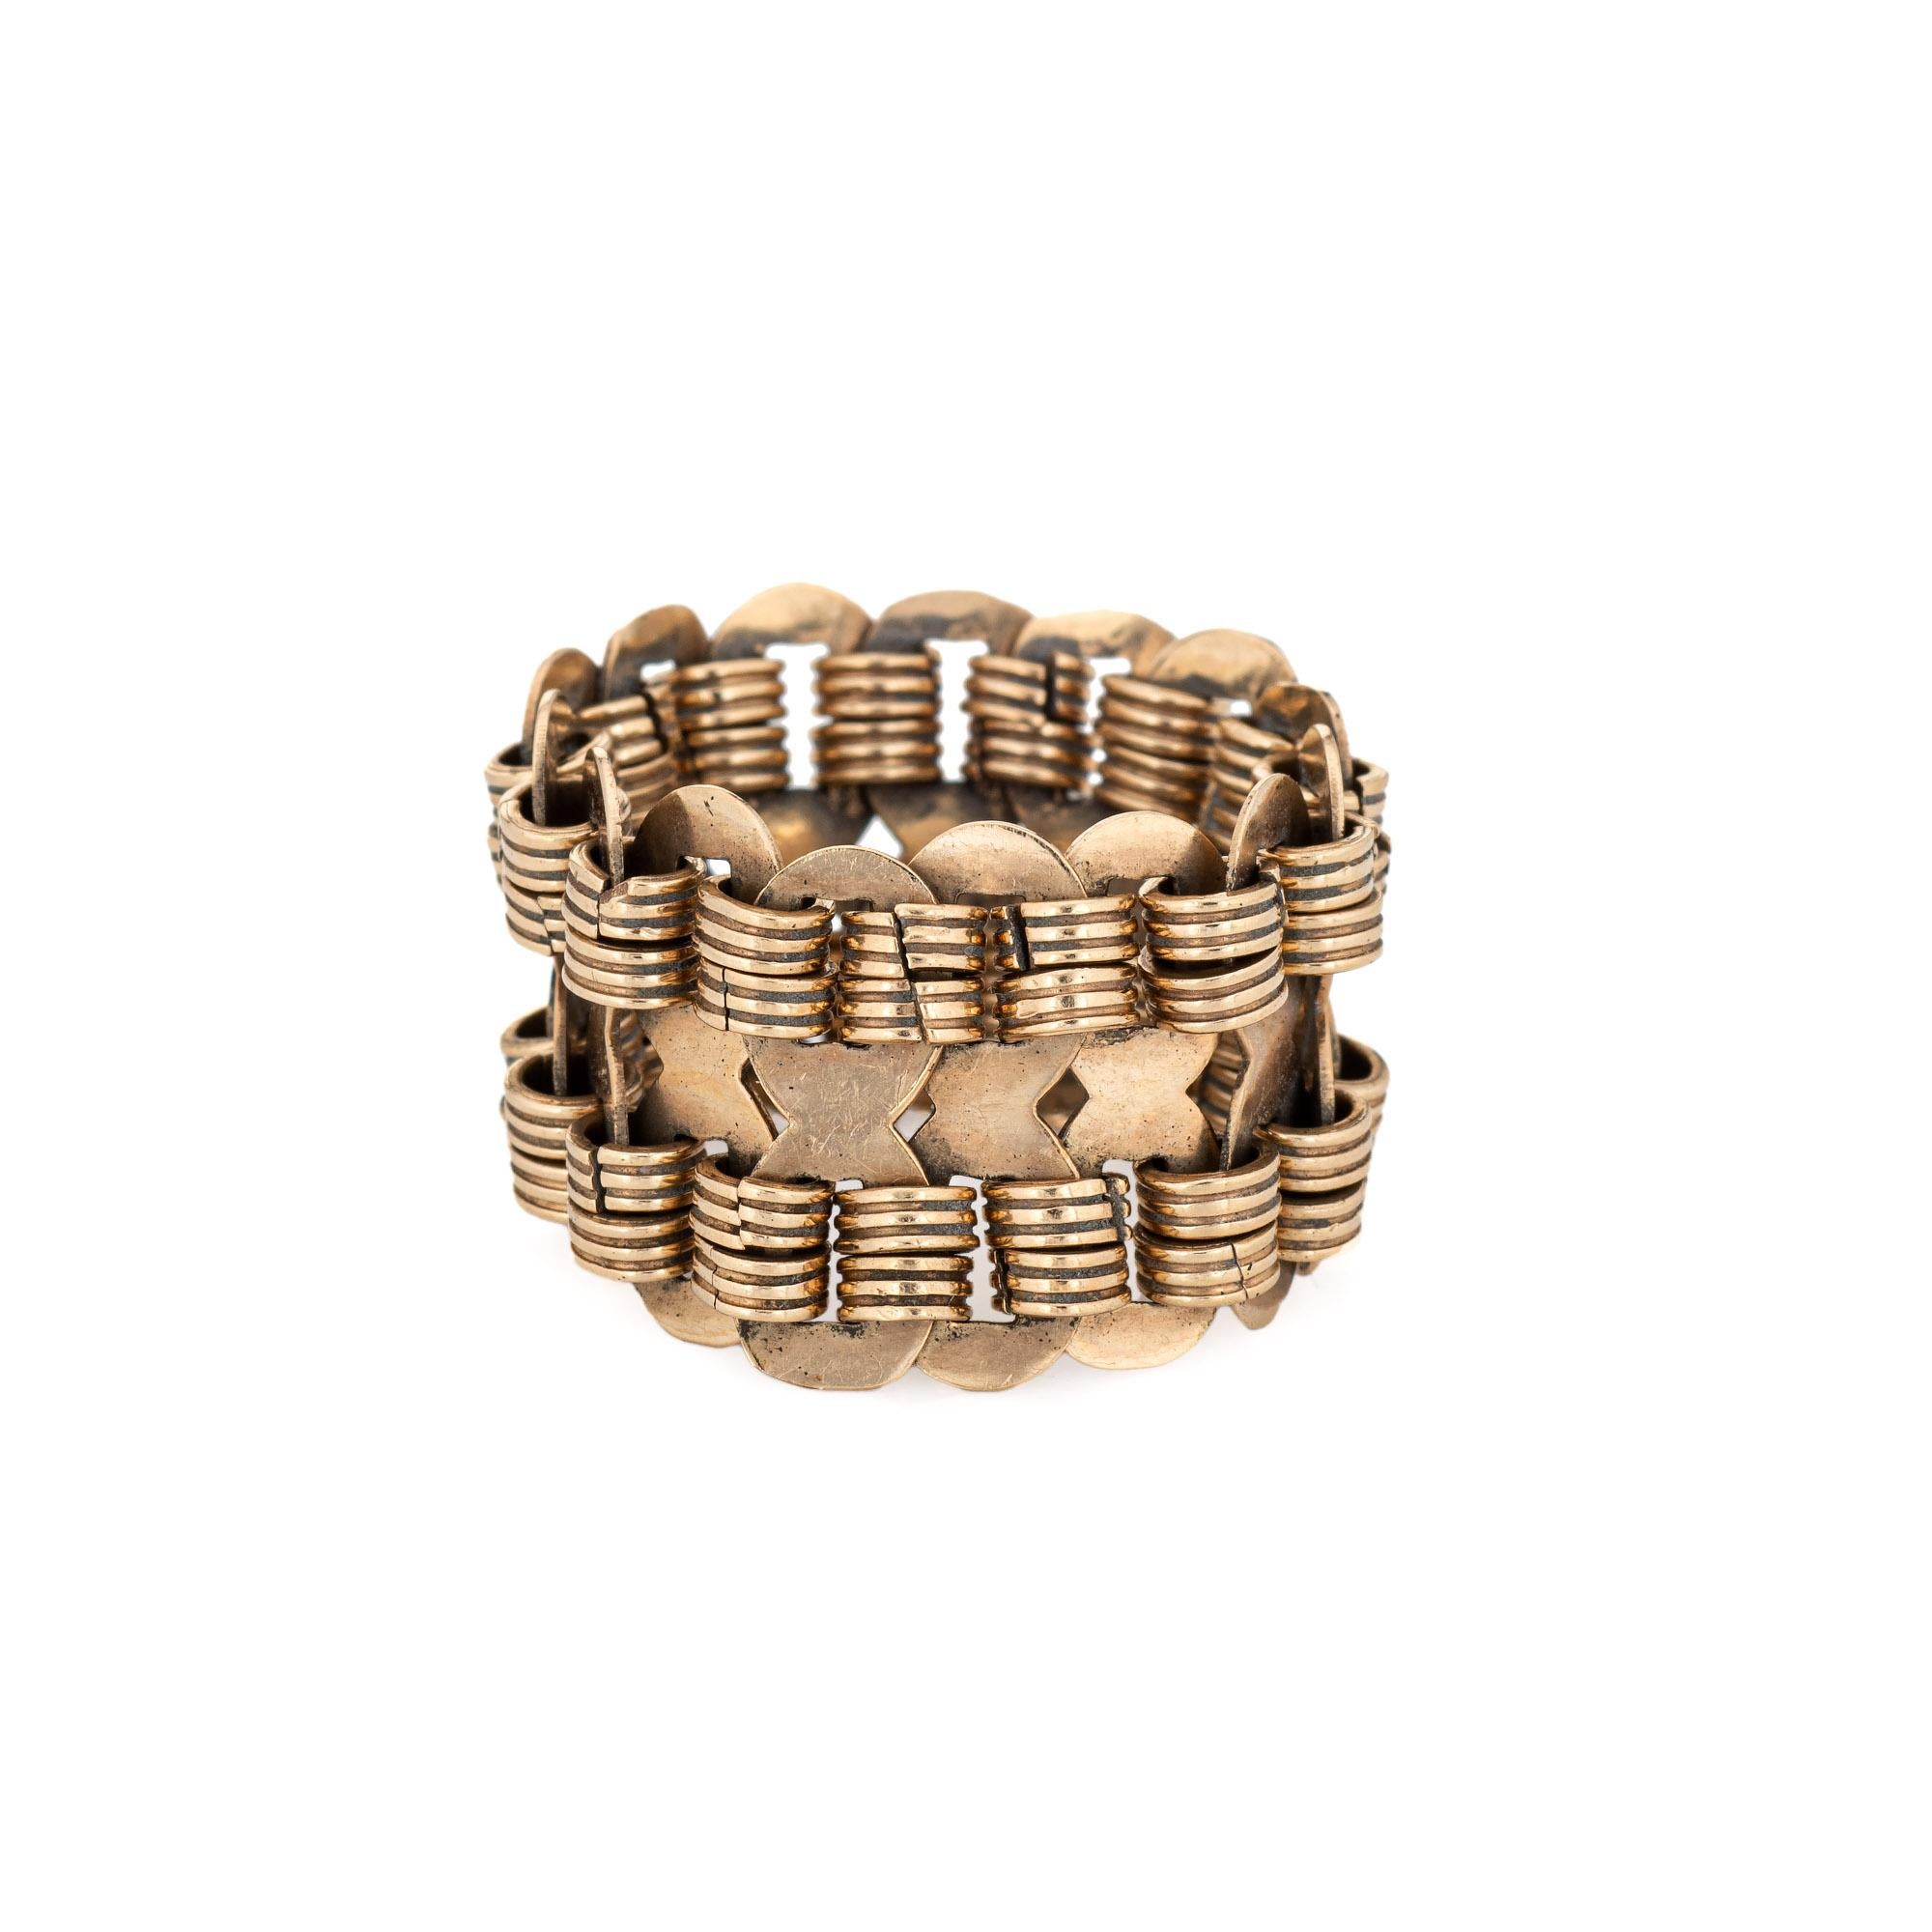 Stylish vintage flex band ring (circa 1970s) crafted in 14 karat yellow gold. 

The wide band (15mm - 0.59 inches) features chain links that join together and meld to the shape of your finger. The ring makes a nice statement on the hand and can be